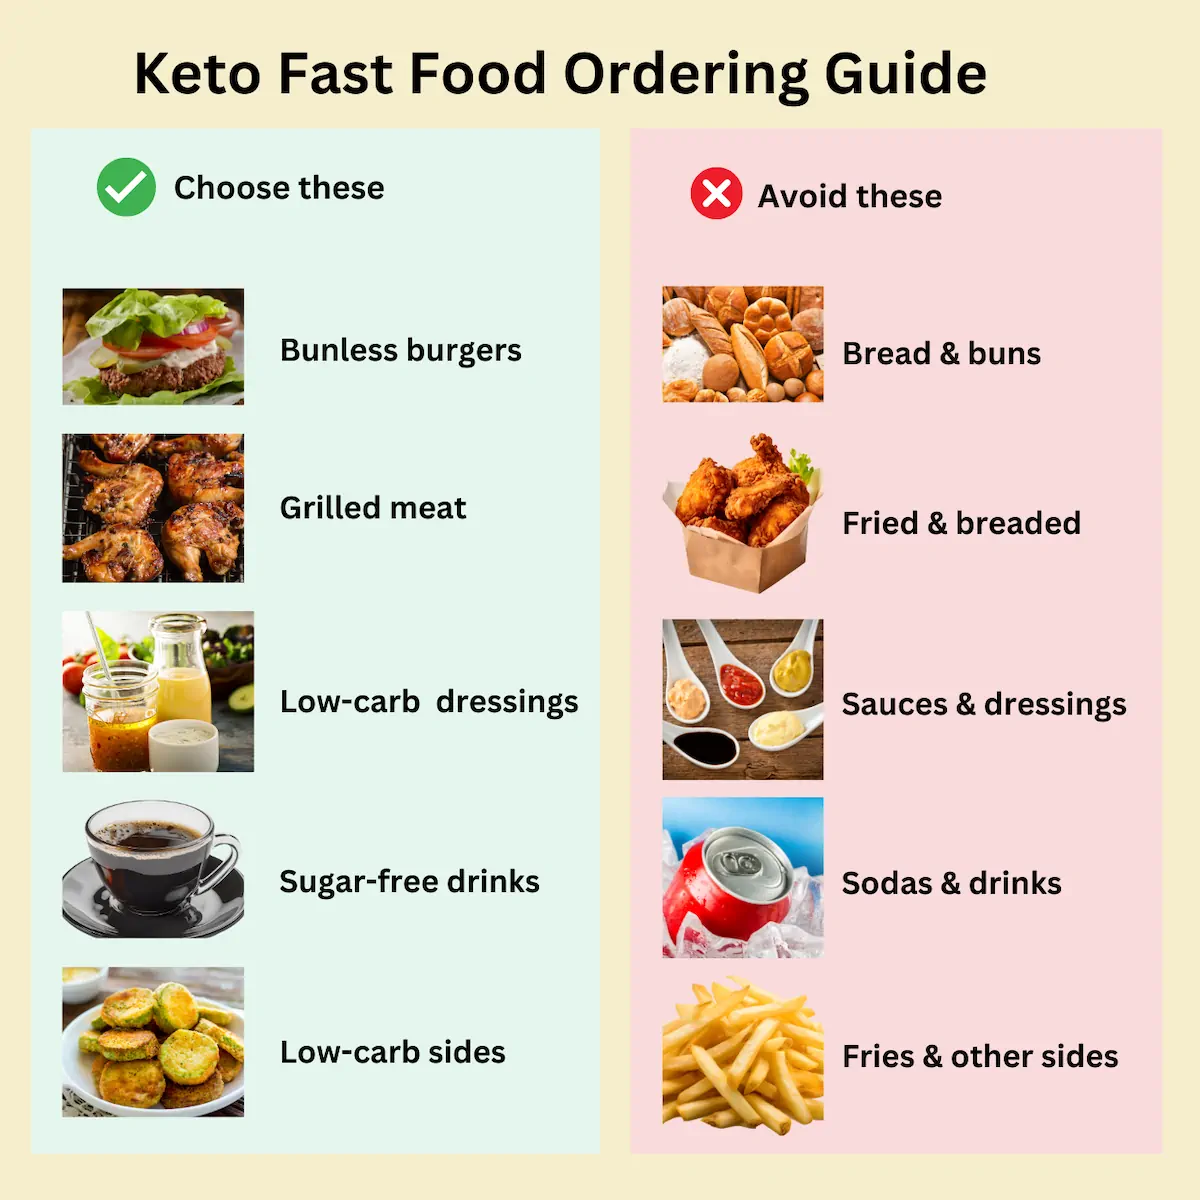 An infographic showing what to choose and what to avoid while ordering a fast food item.